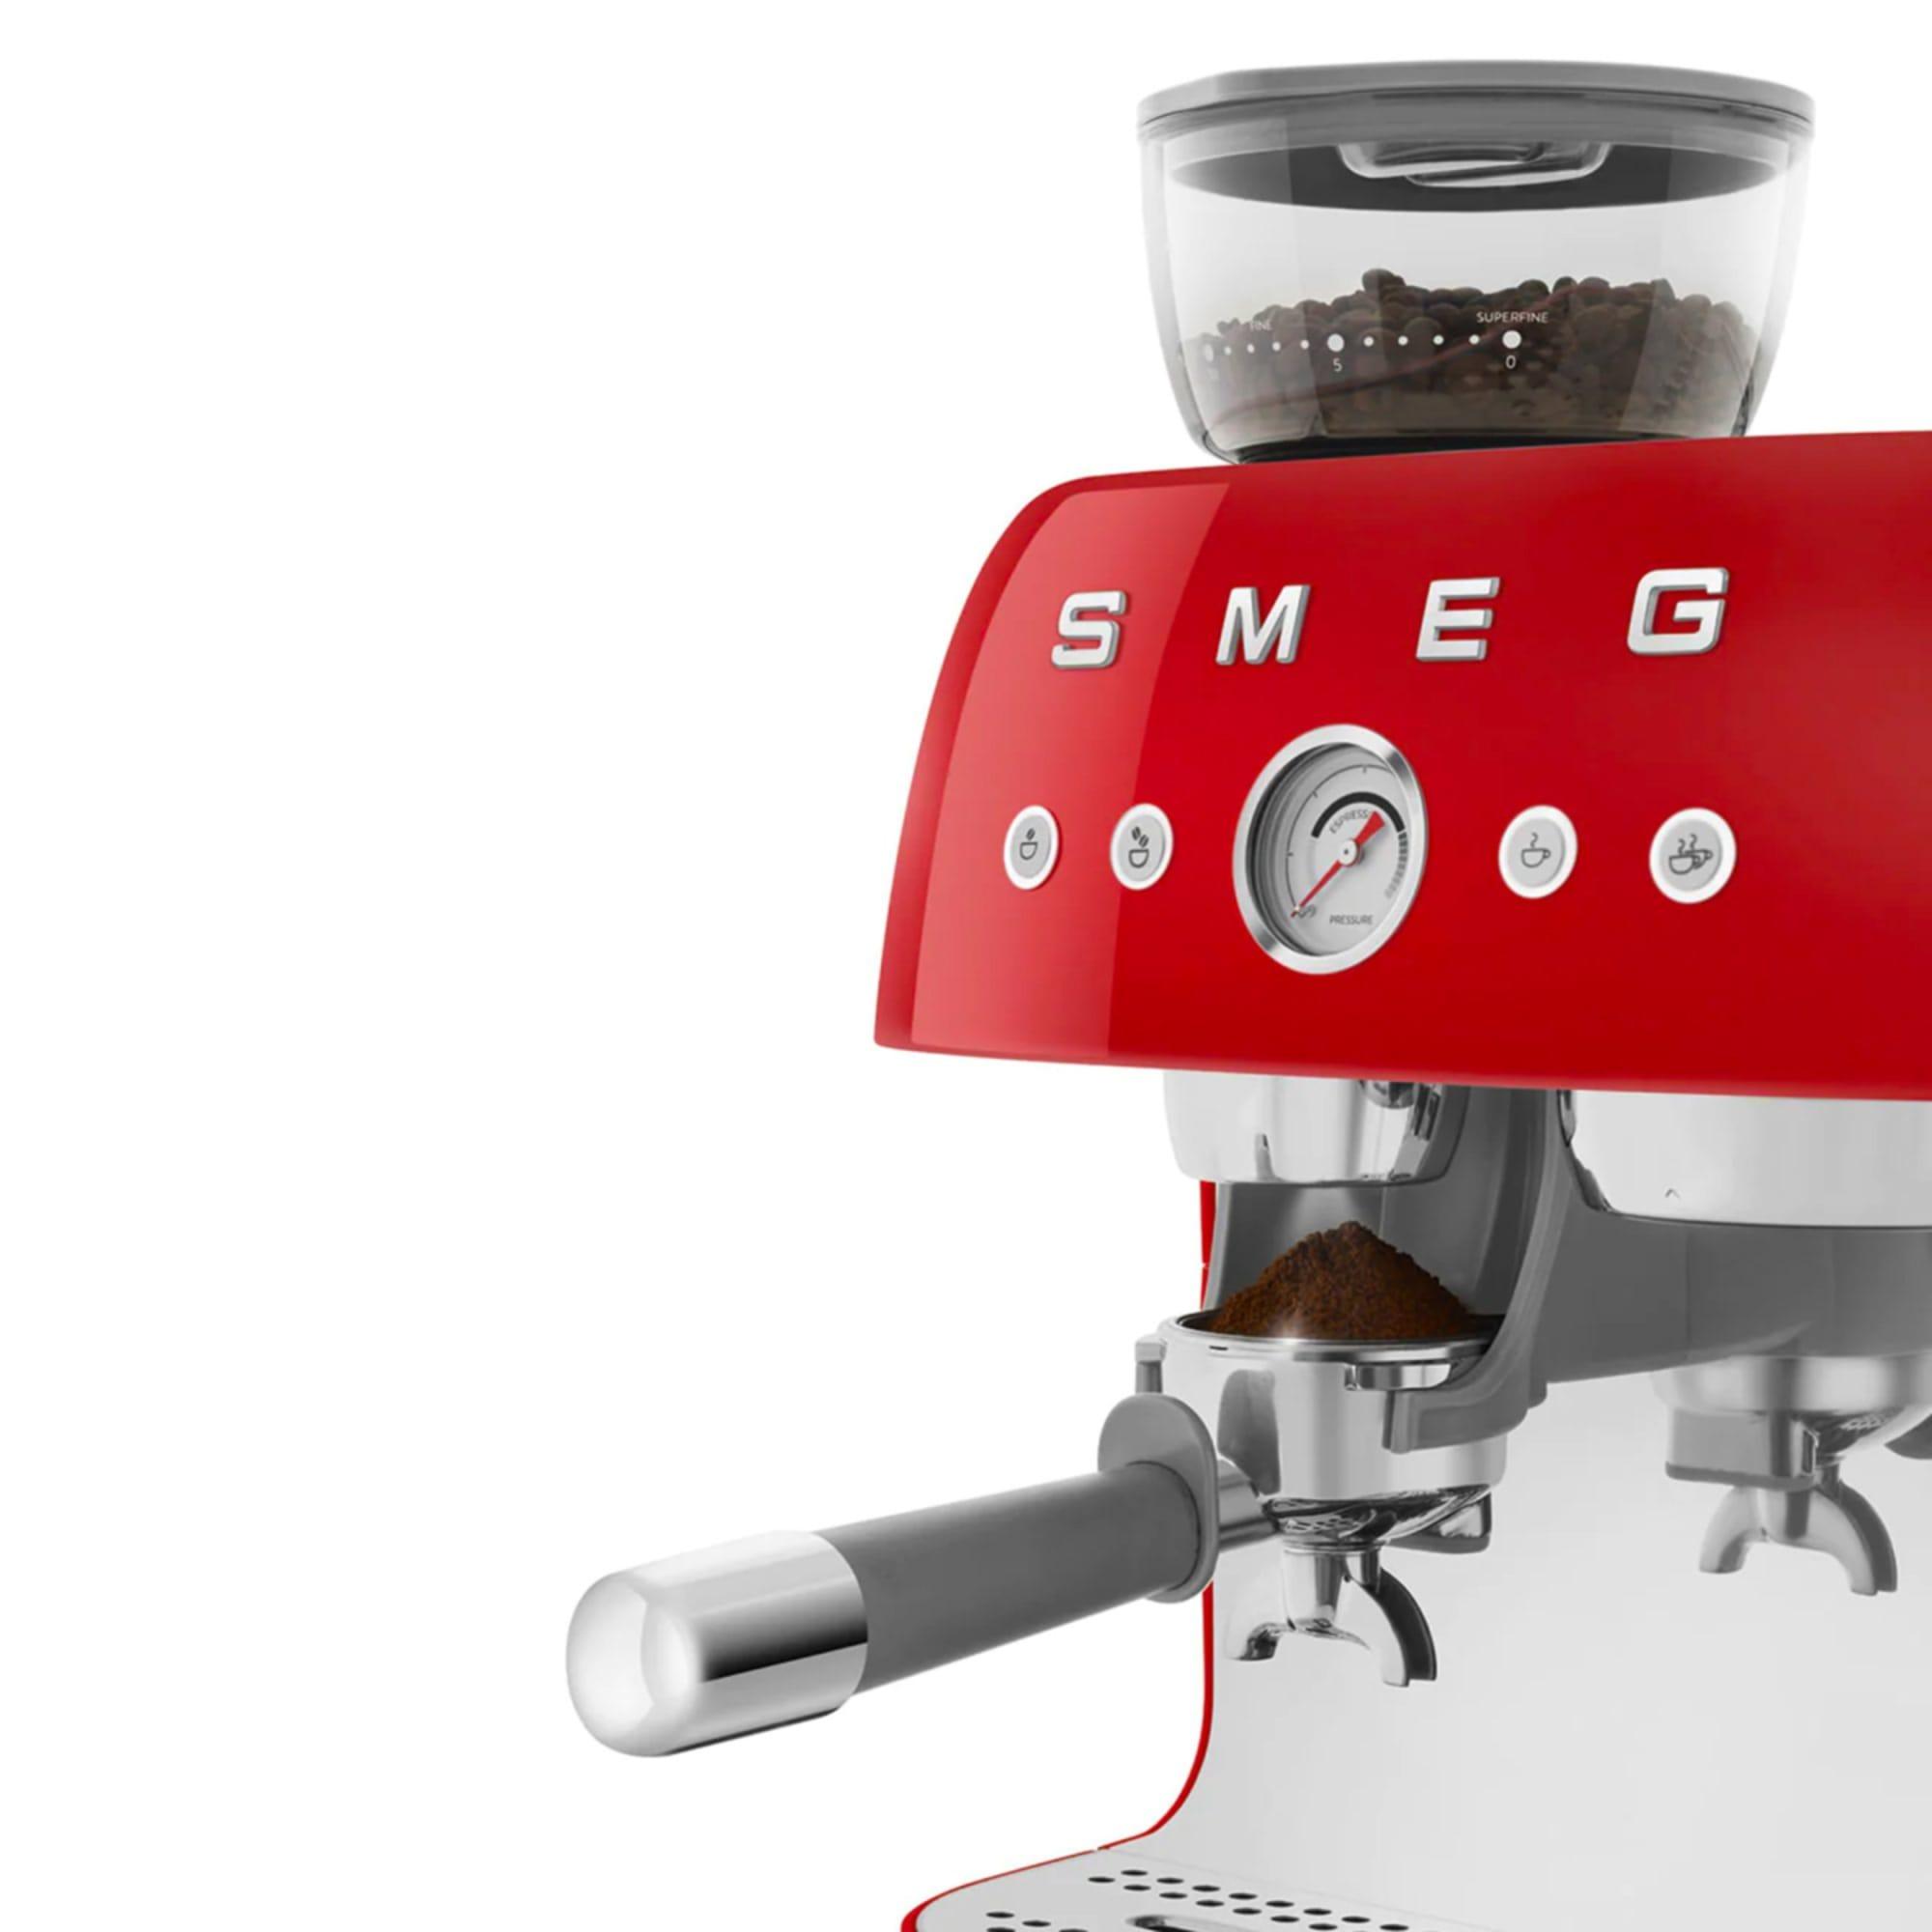 Smeg 50's Retro Style Espresso Machine with Built In Grinder Red Image 6